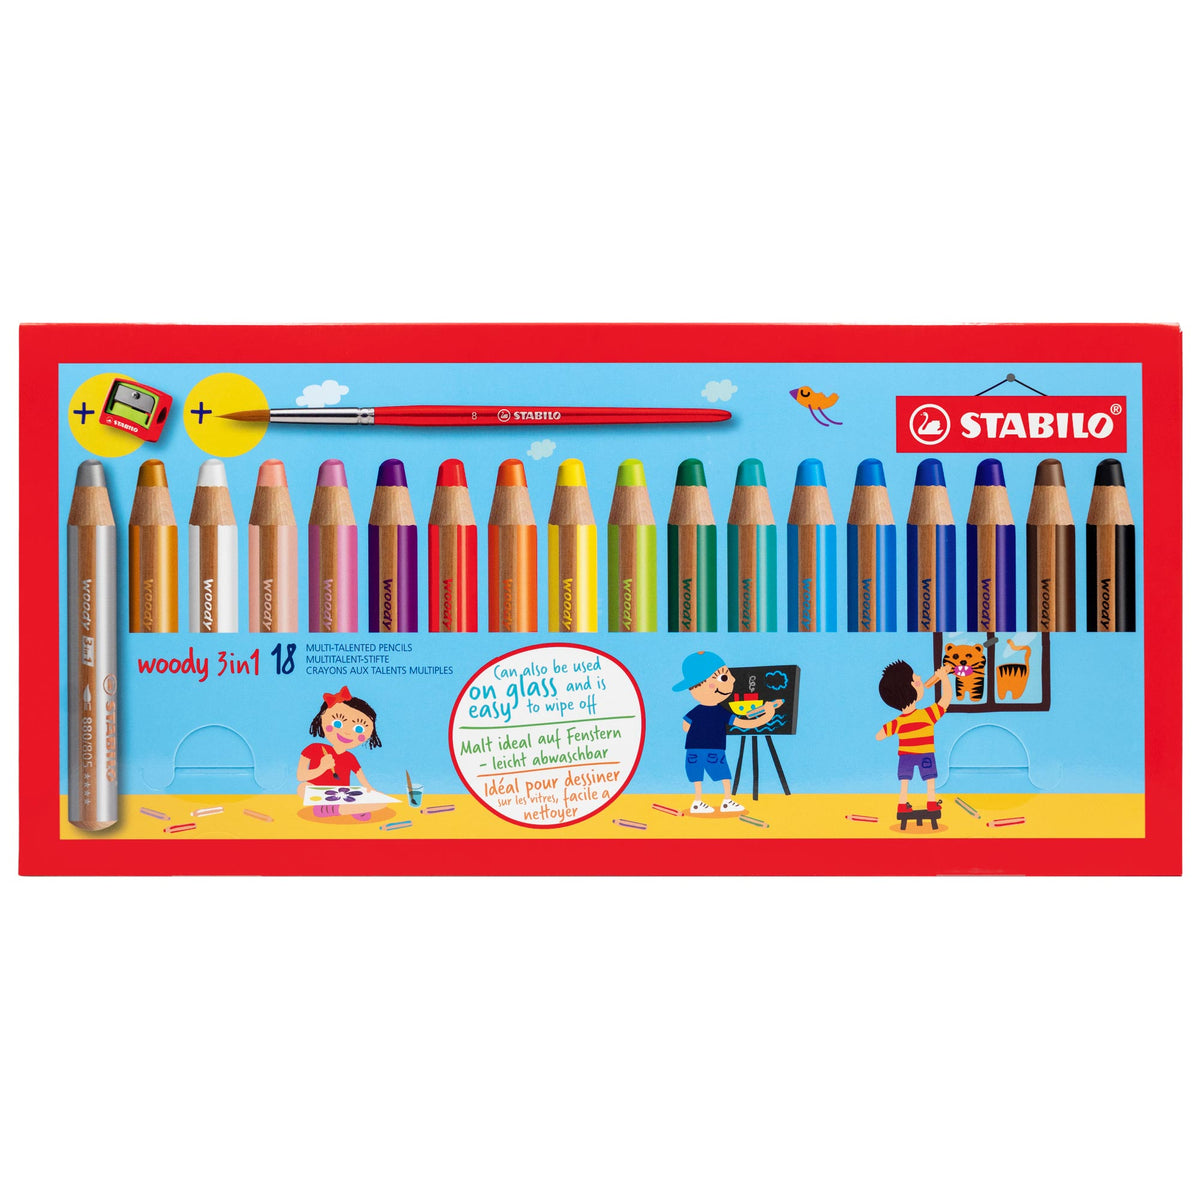 Stabilo Woody 3 in 1 Pencil Crayons - Set of 18